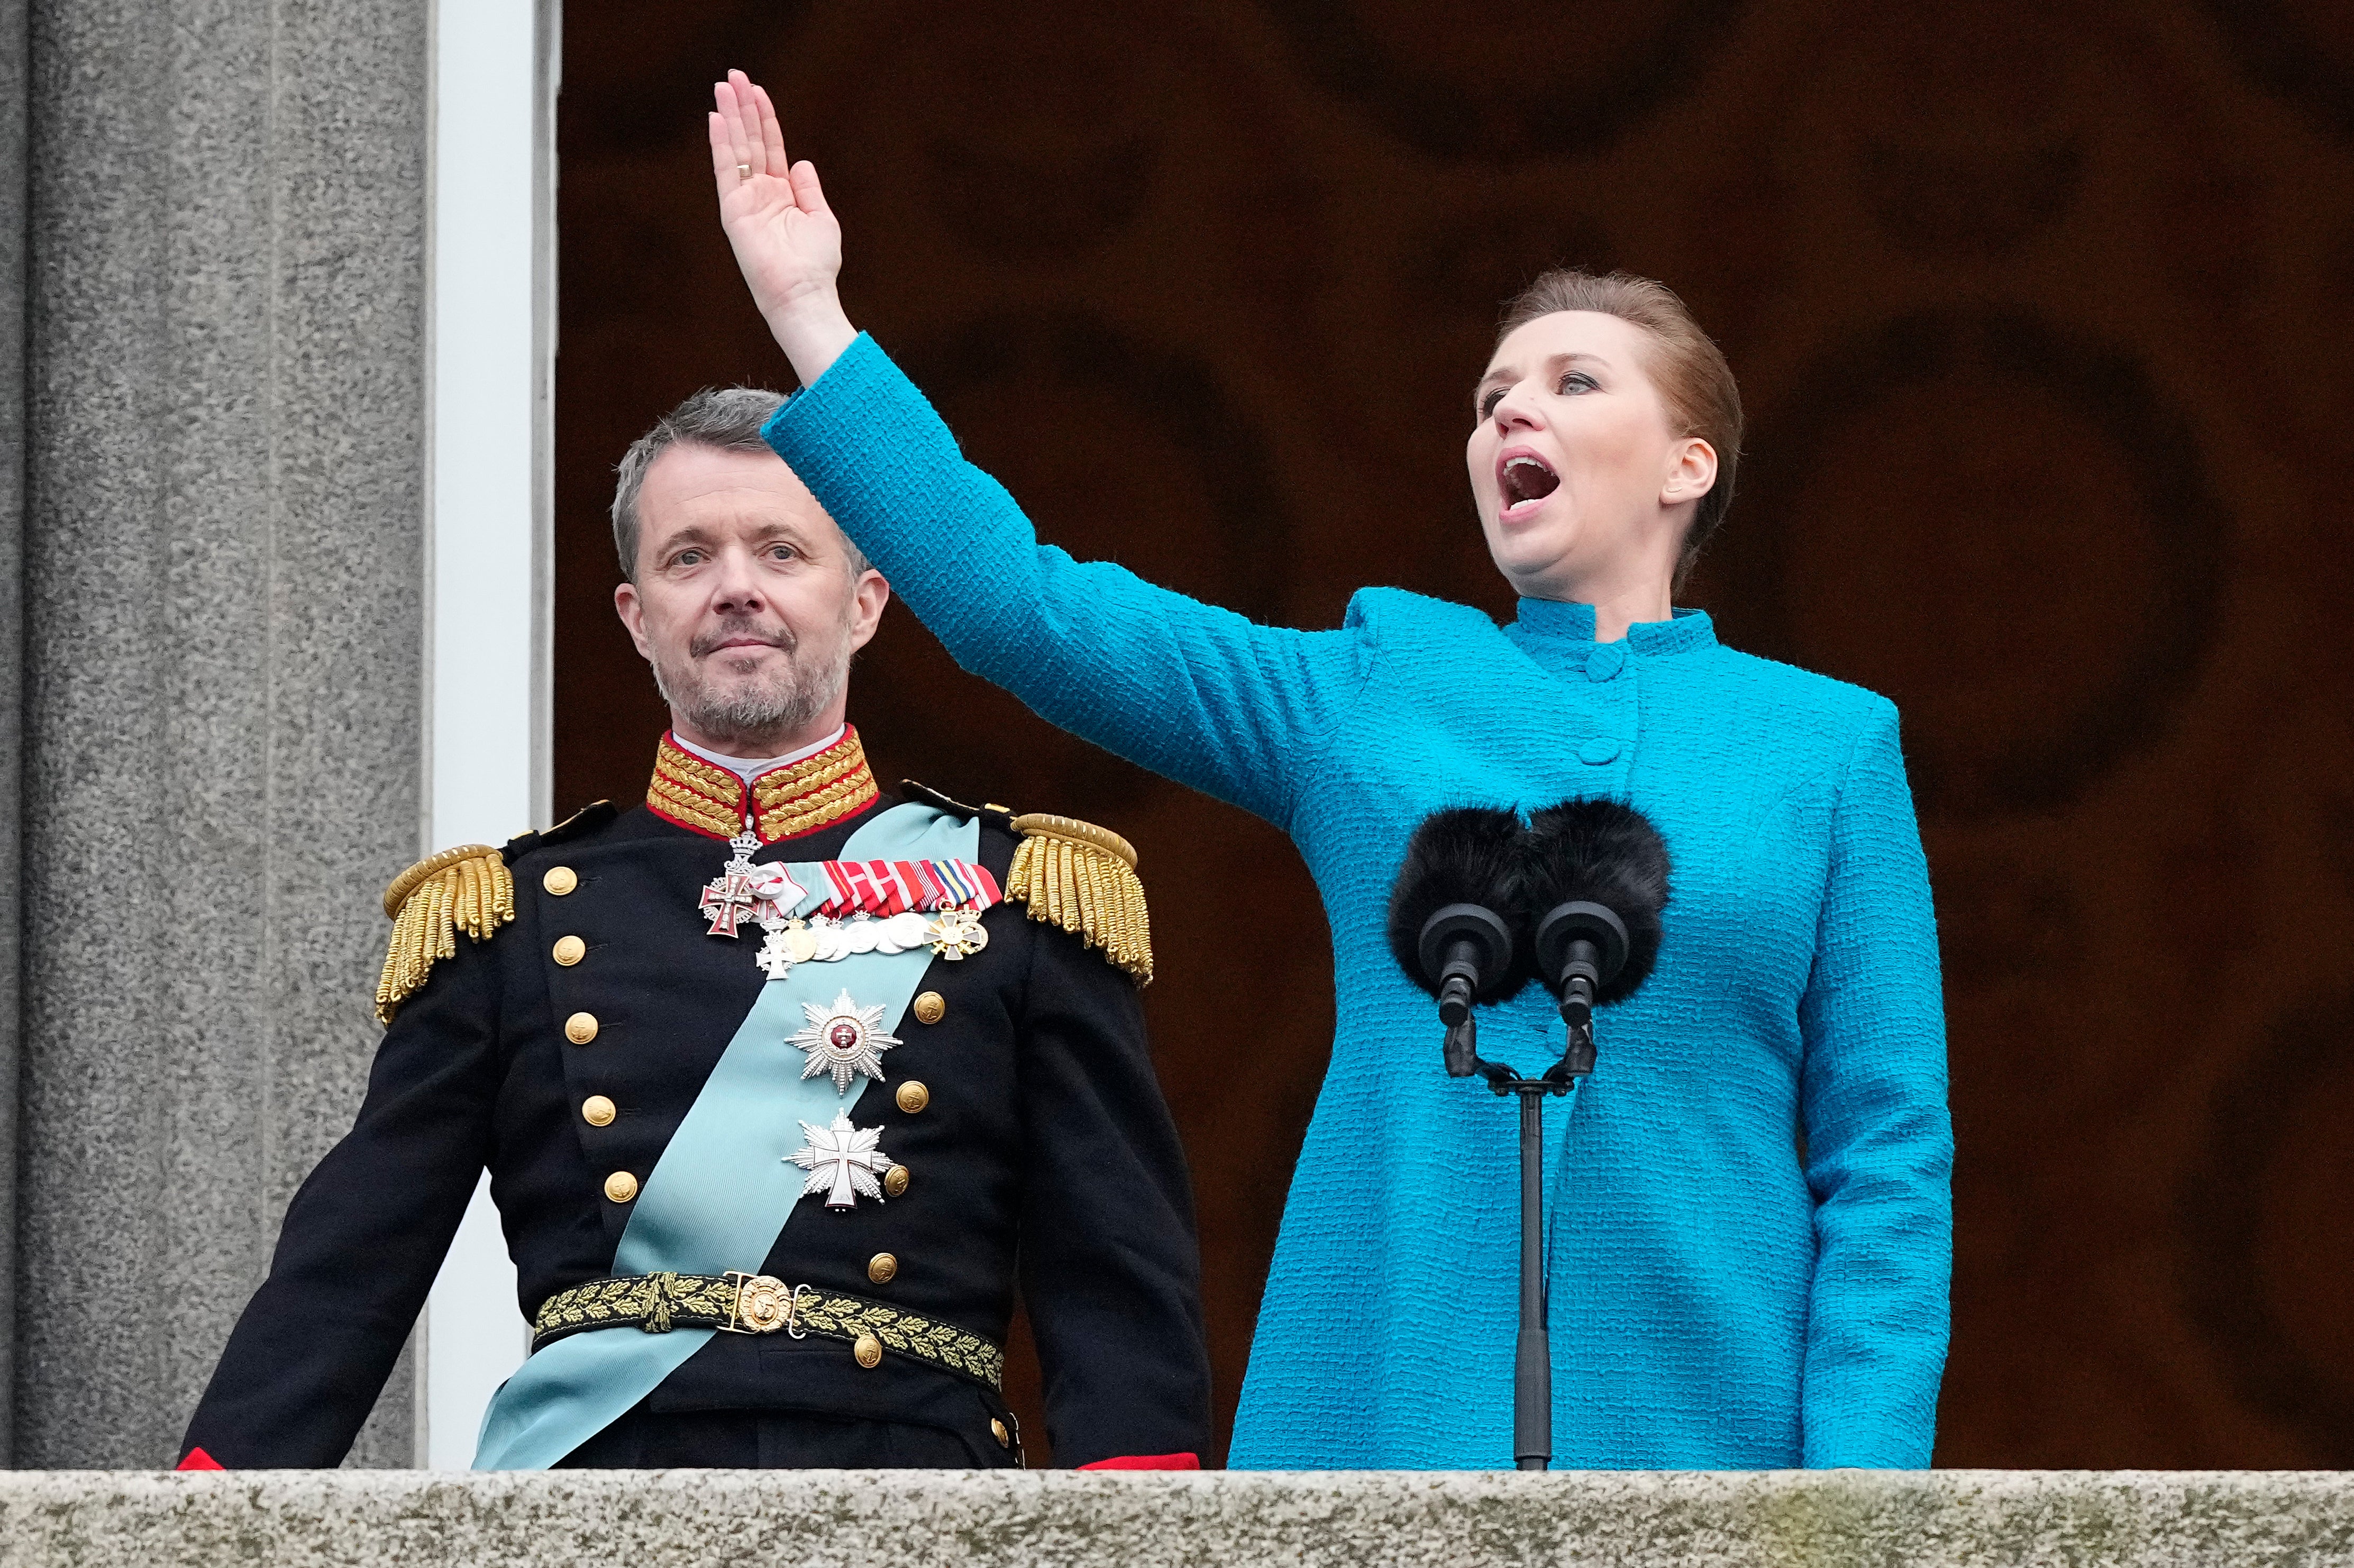 Danish PM Mette Frederiksen proclaims King Frederik X as the new king from the balcony of Christiansborg Palace in Copenhagen